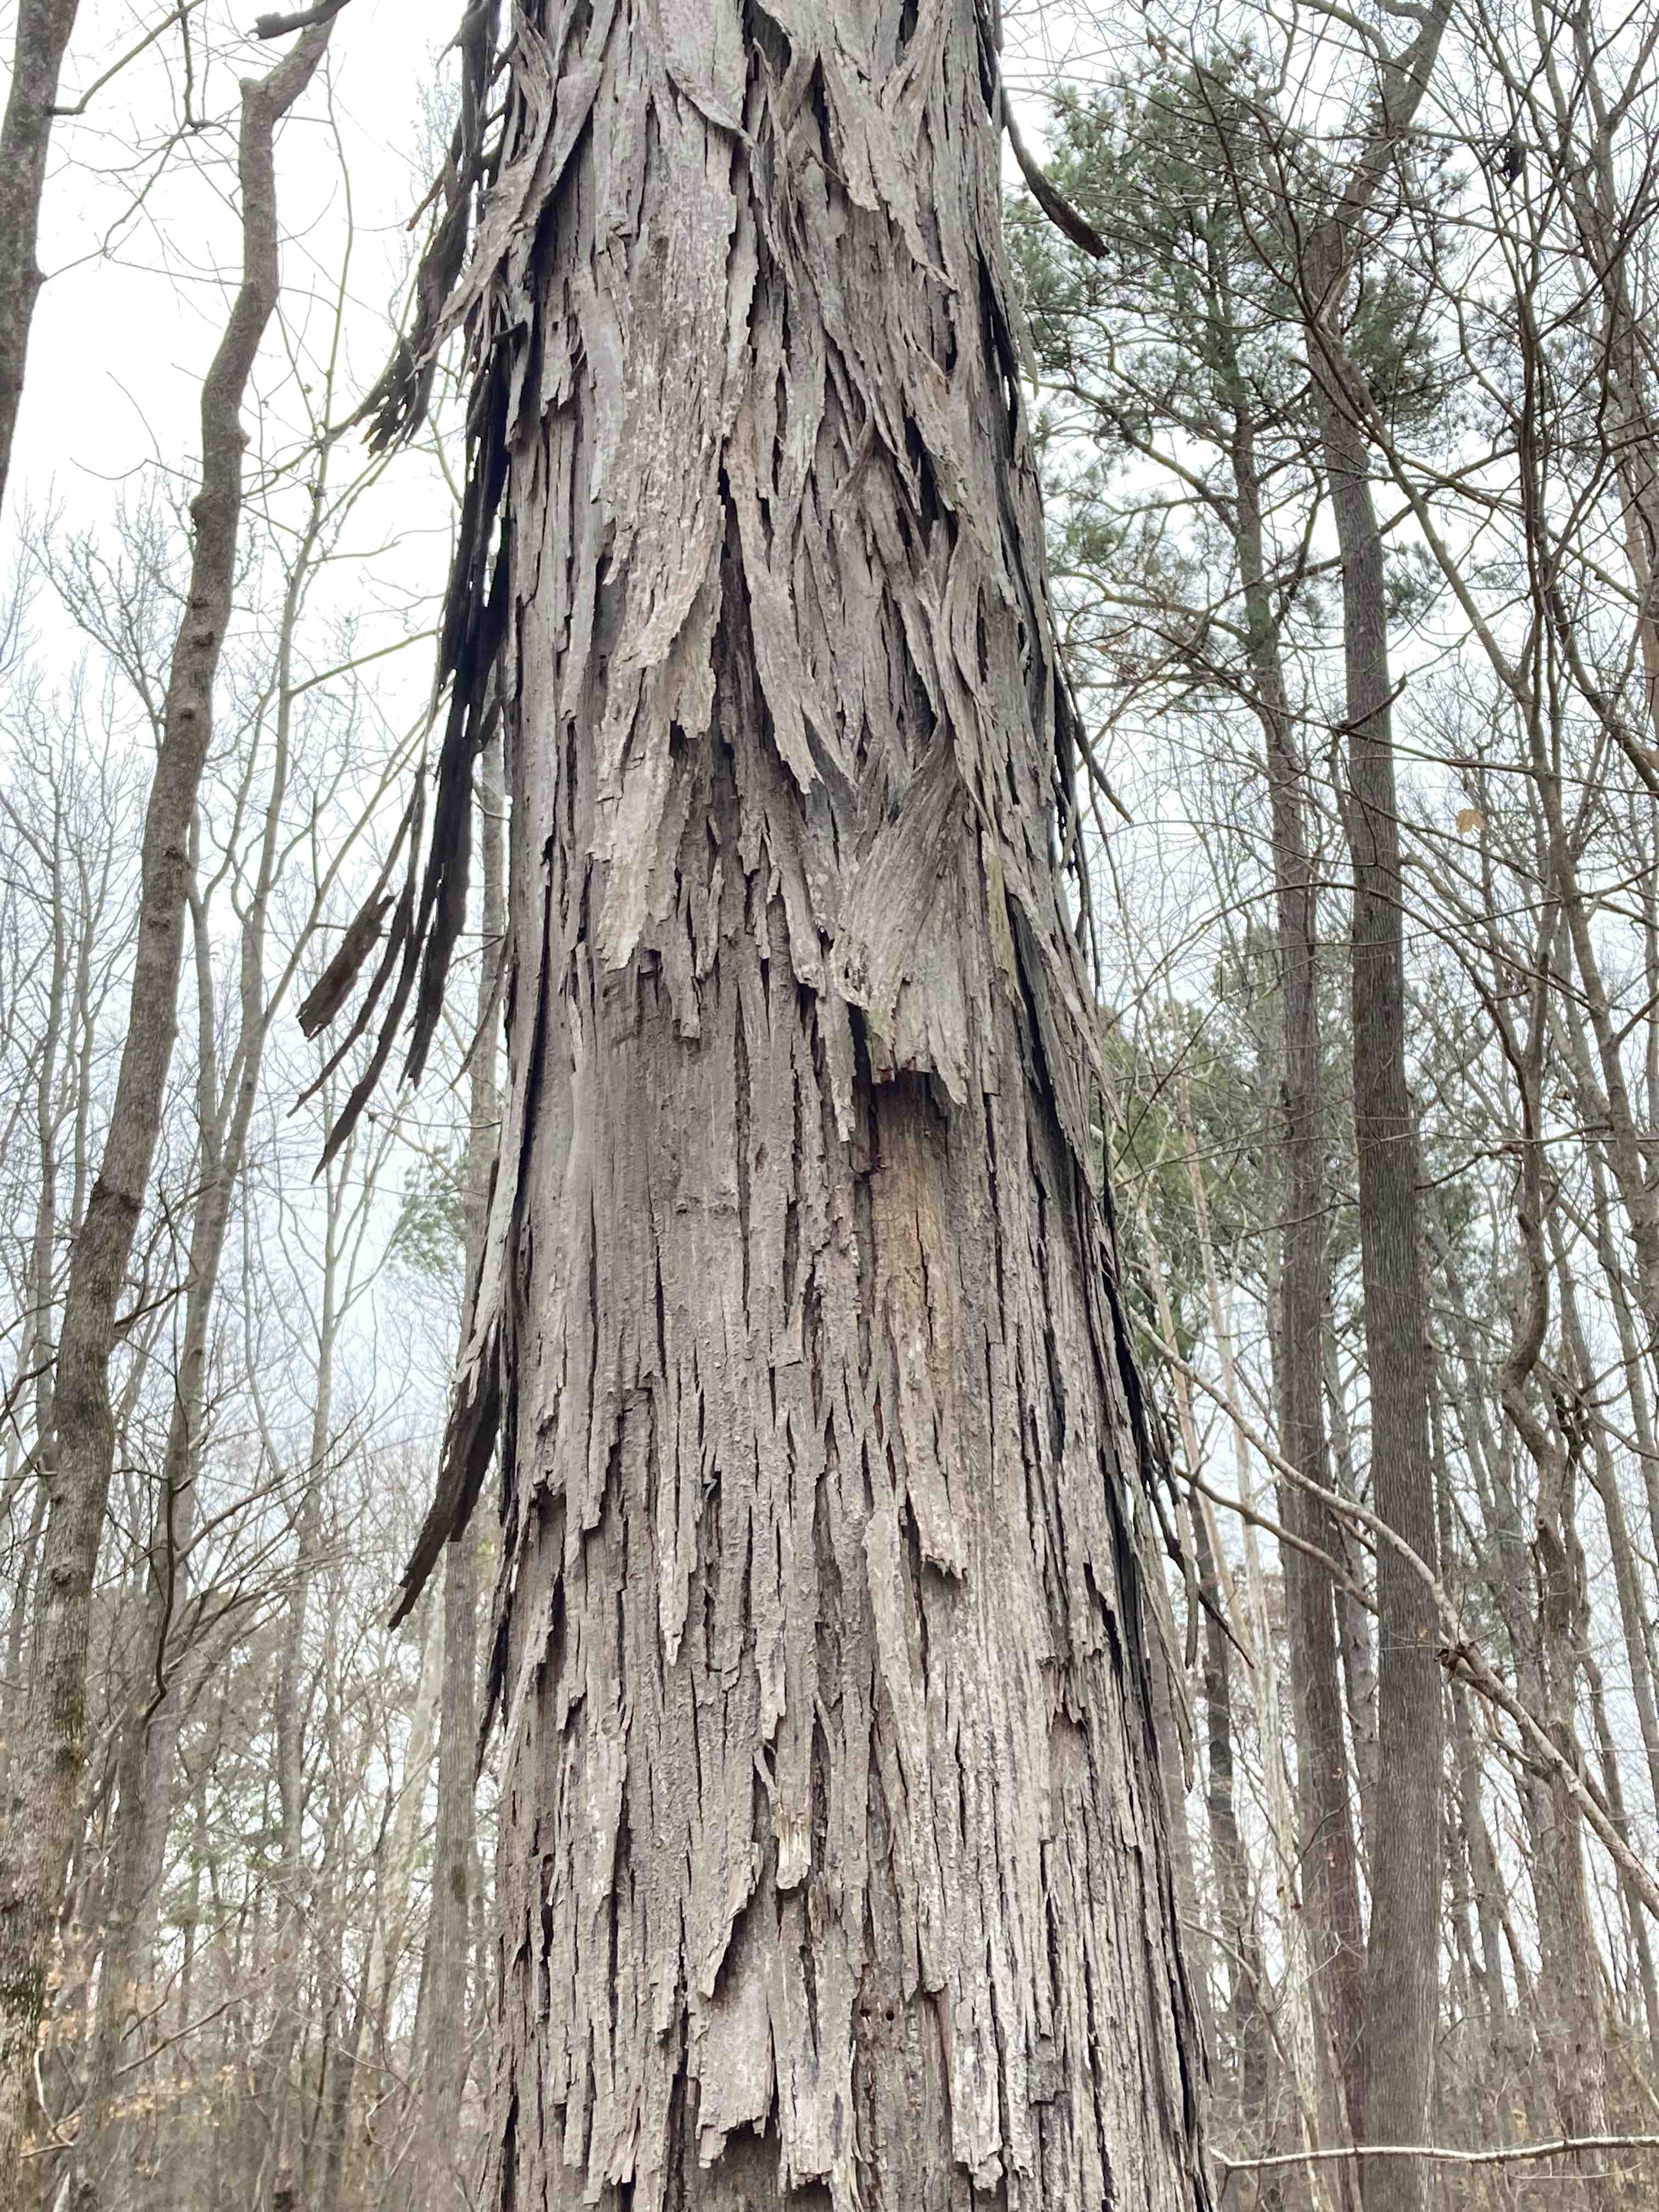 The Scientific Name is Carya ovata. You will likely hear them called Common Shagbark Hickory. This picture shows the Loose, shaggy, gray bark. of Carya ovata